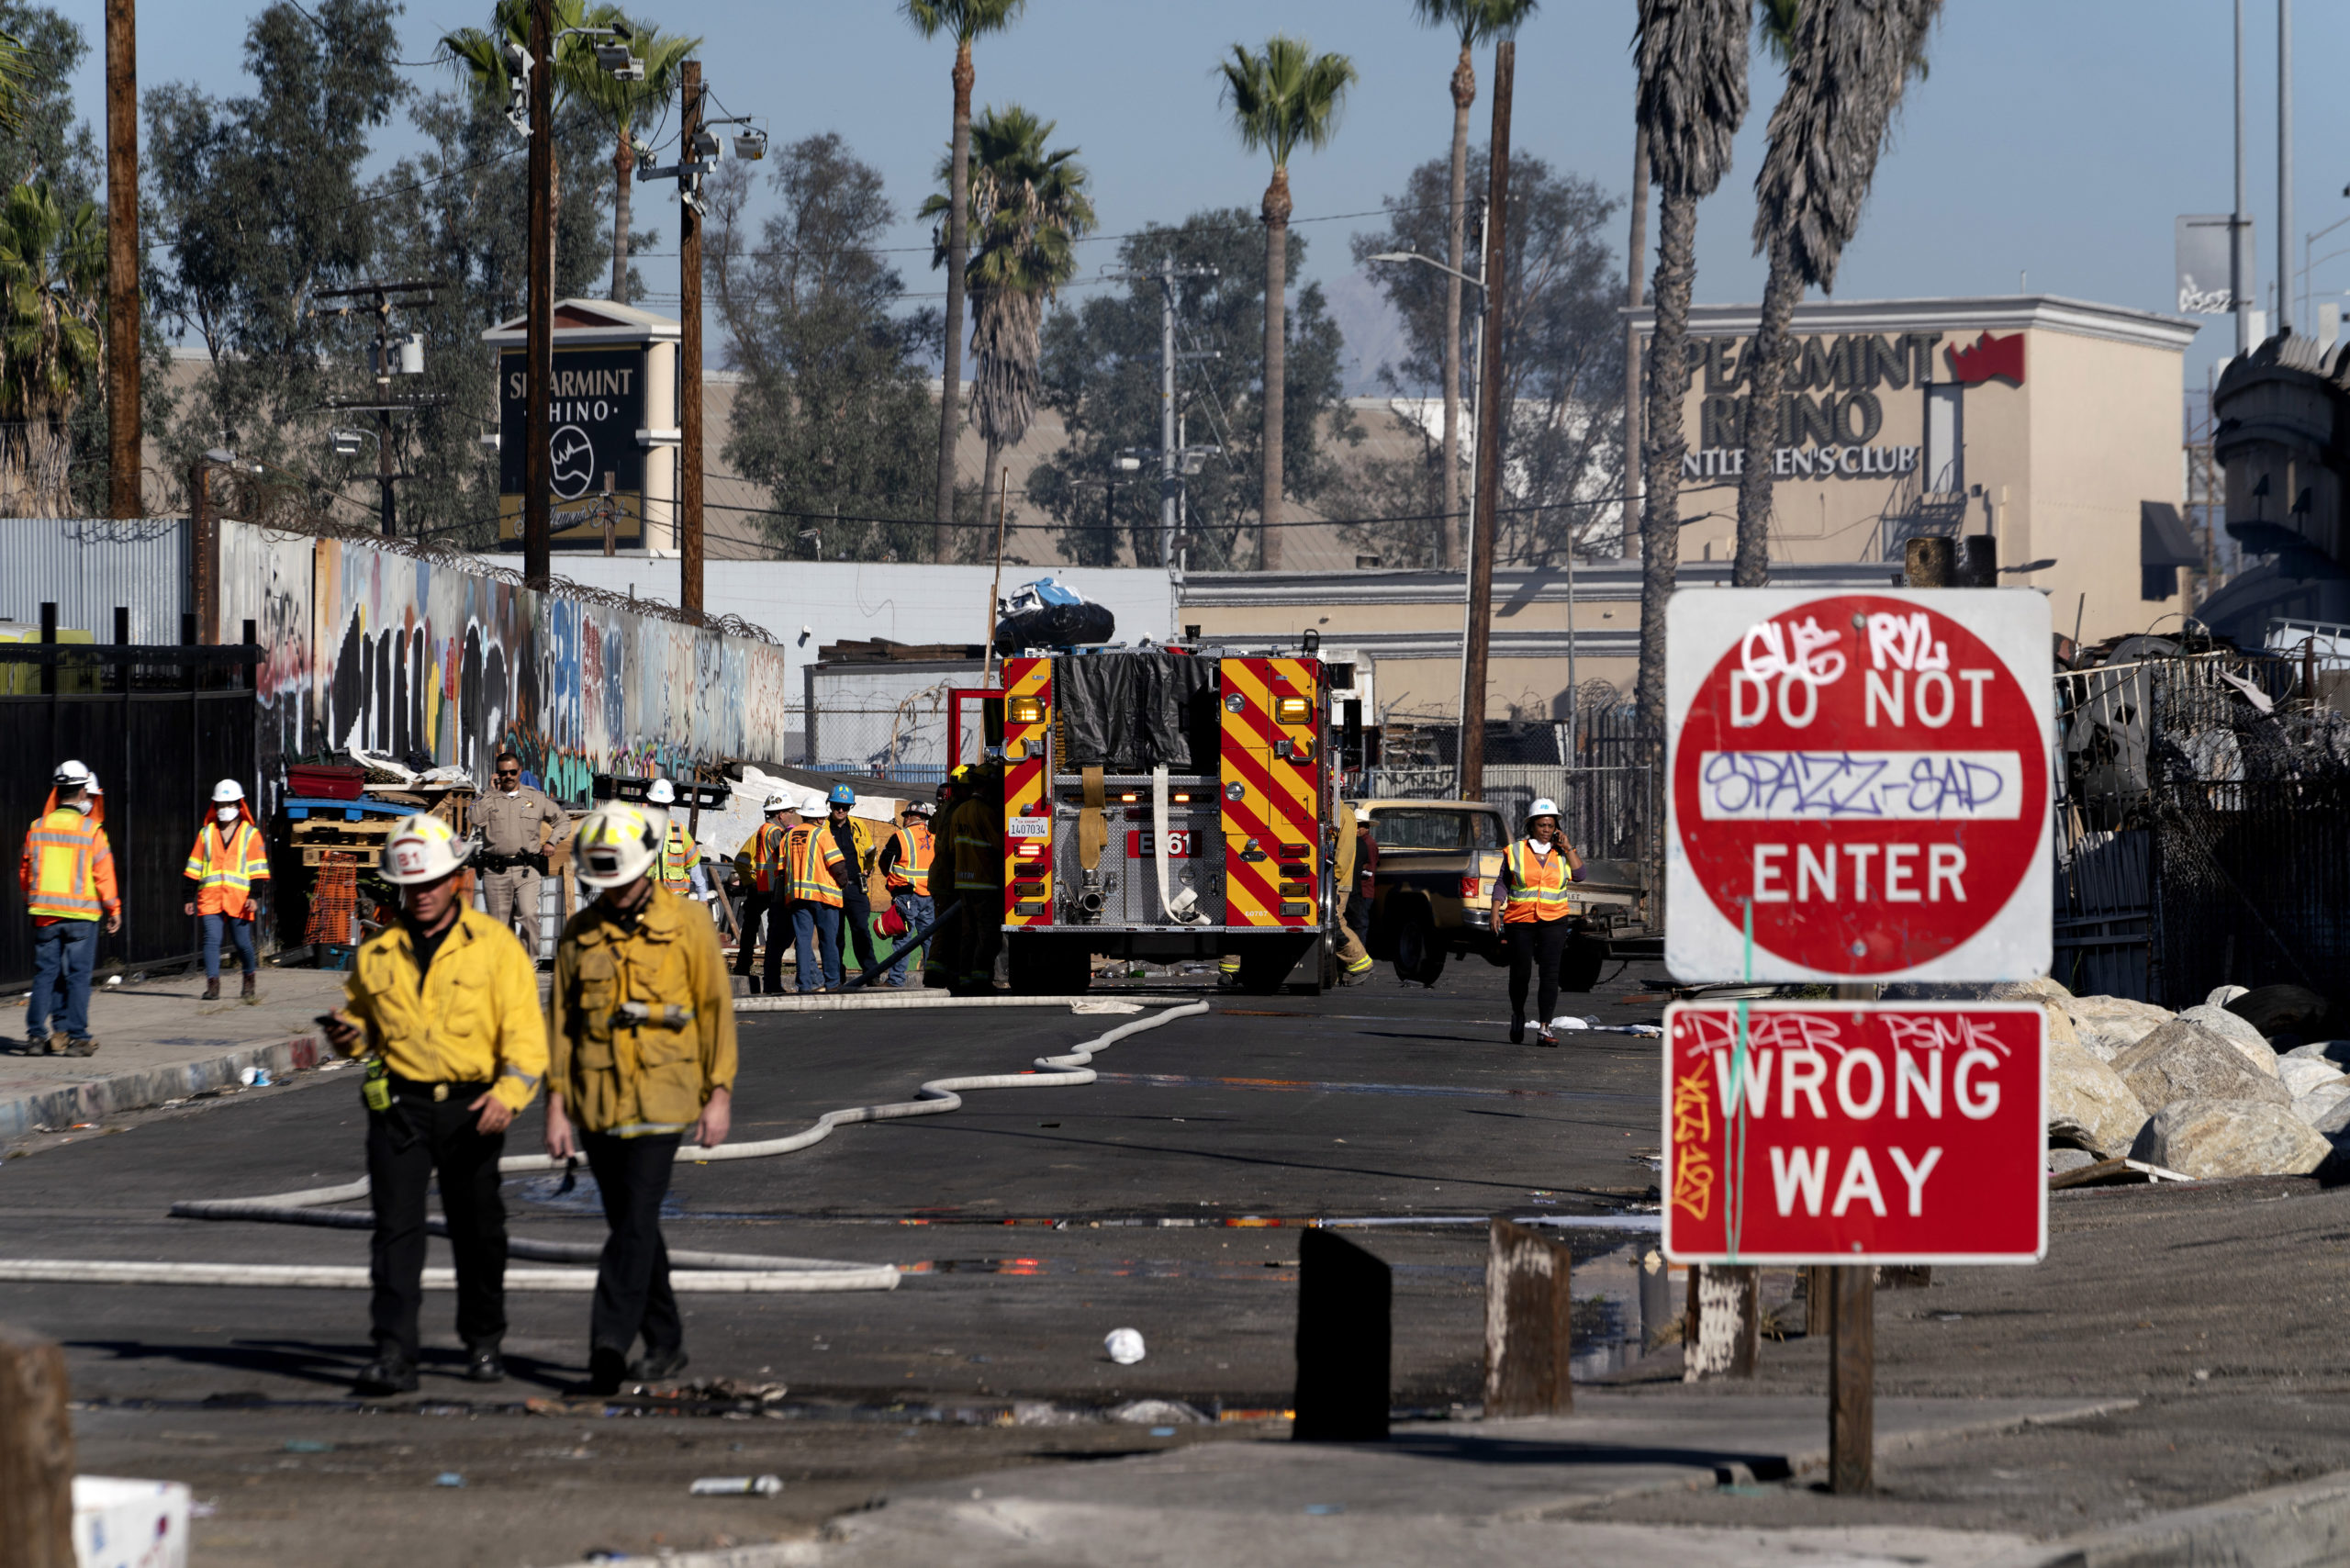 Interstate 10 Severed After Destructive Fire Underneath Los Angeles Section of Road, No Reopening Date Given